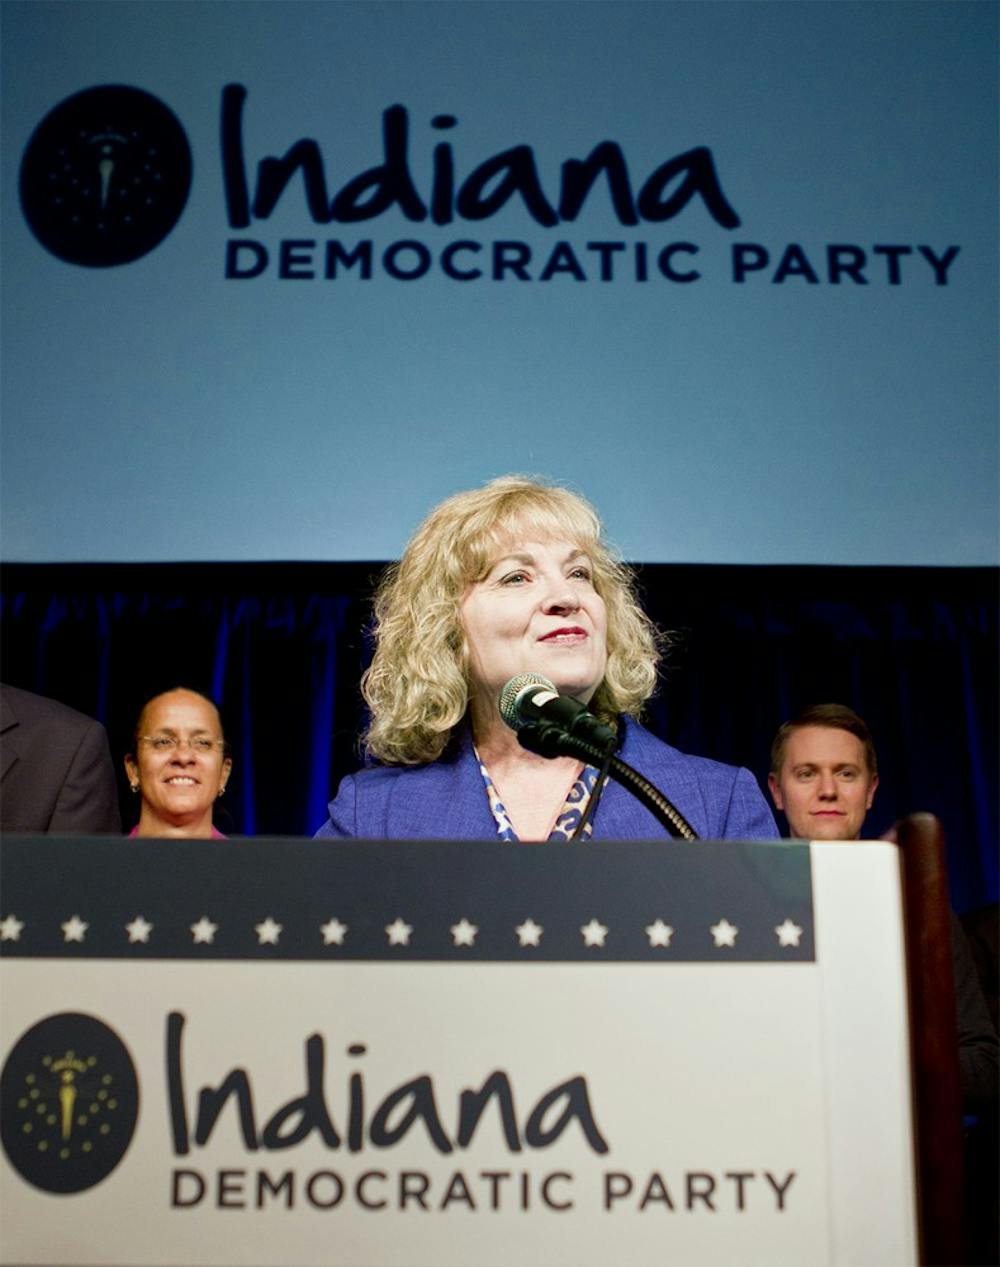 Newly-elected Superintended for the state of Indiana Glenda Ritz addresses attendees of the Democratic watch party in downtown Indianapolis on Nov. 6, 2012.